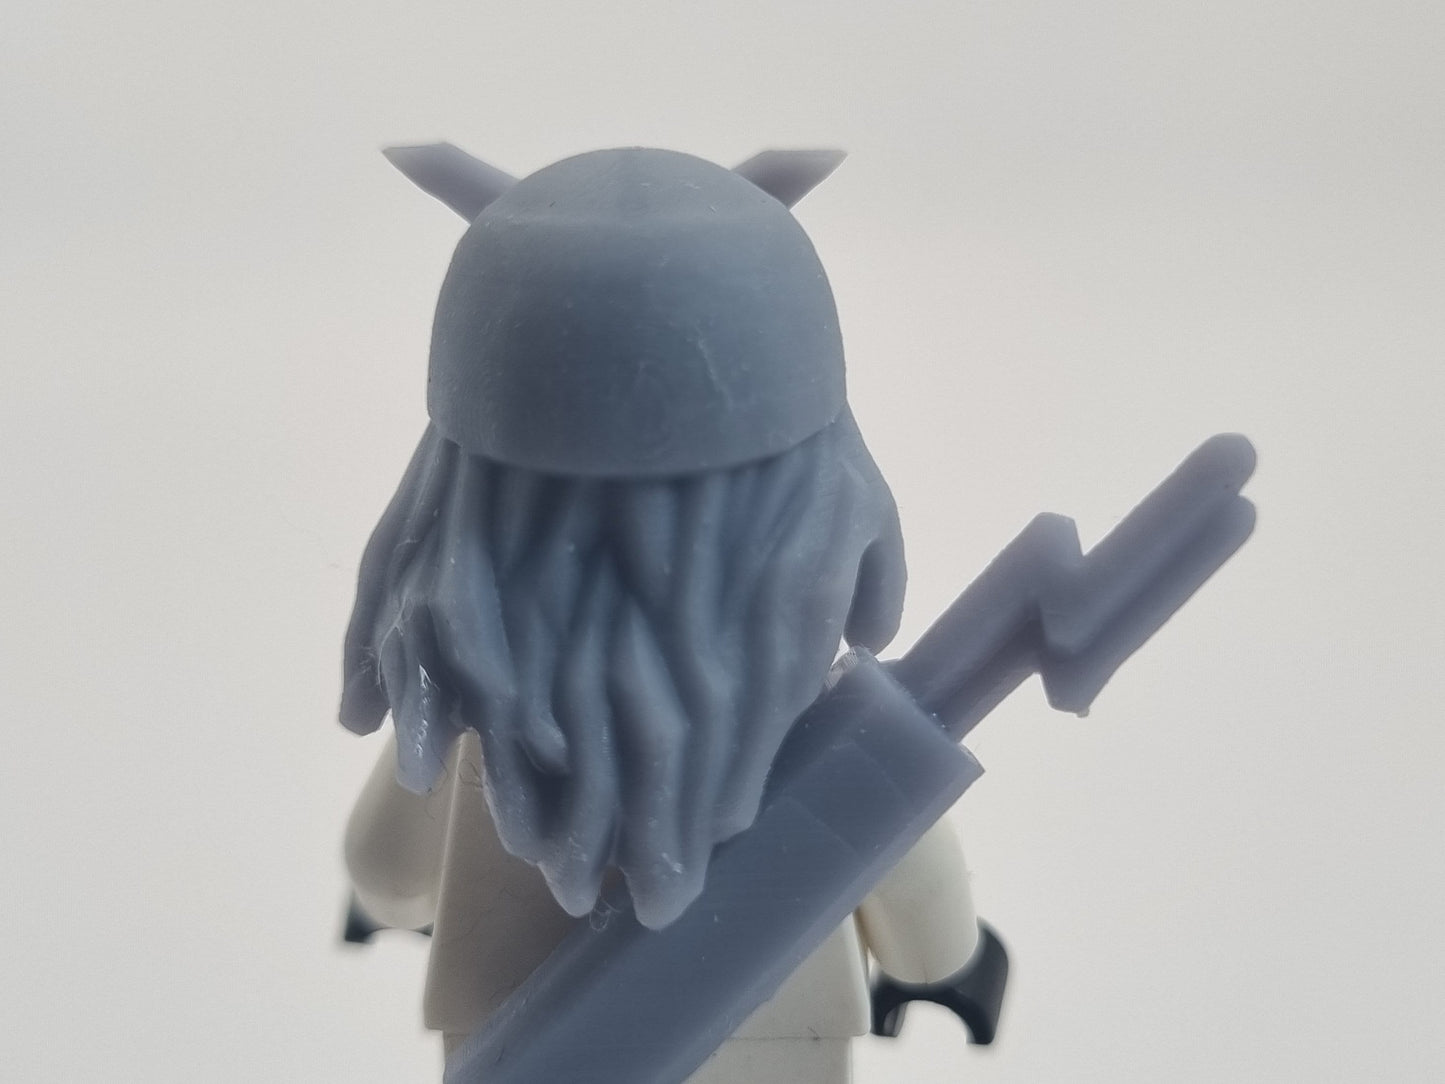 Building toy custom 3D printed Norse god heads and hairs v2!